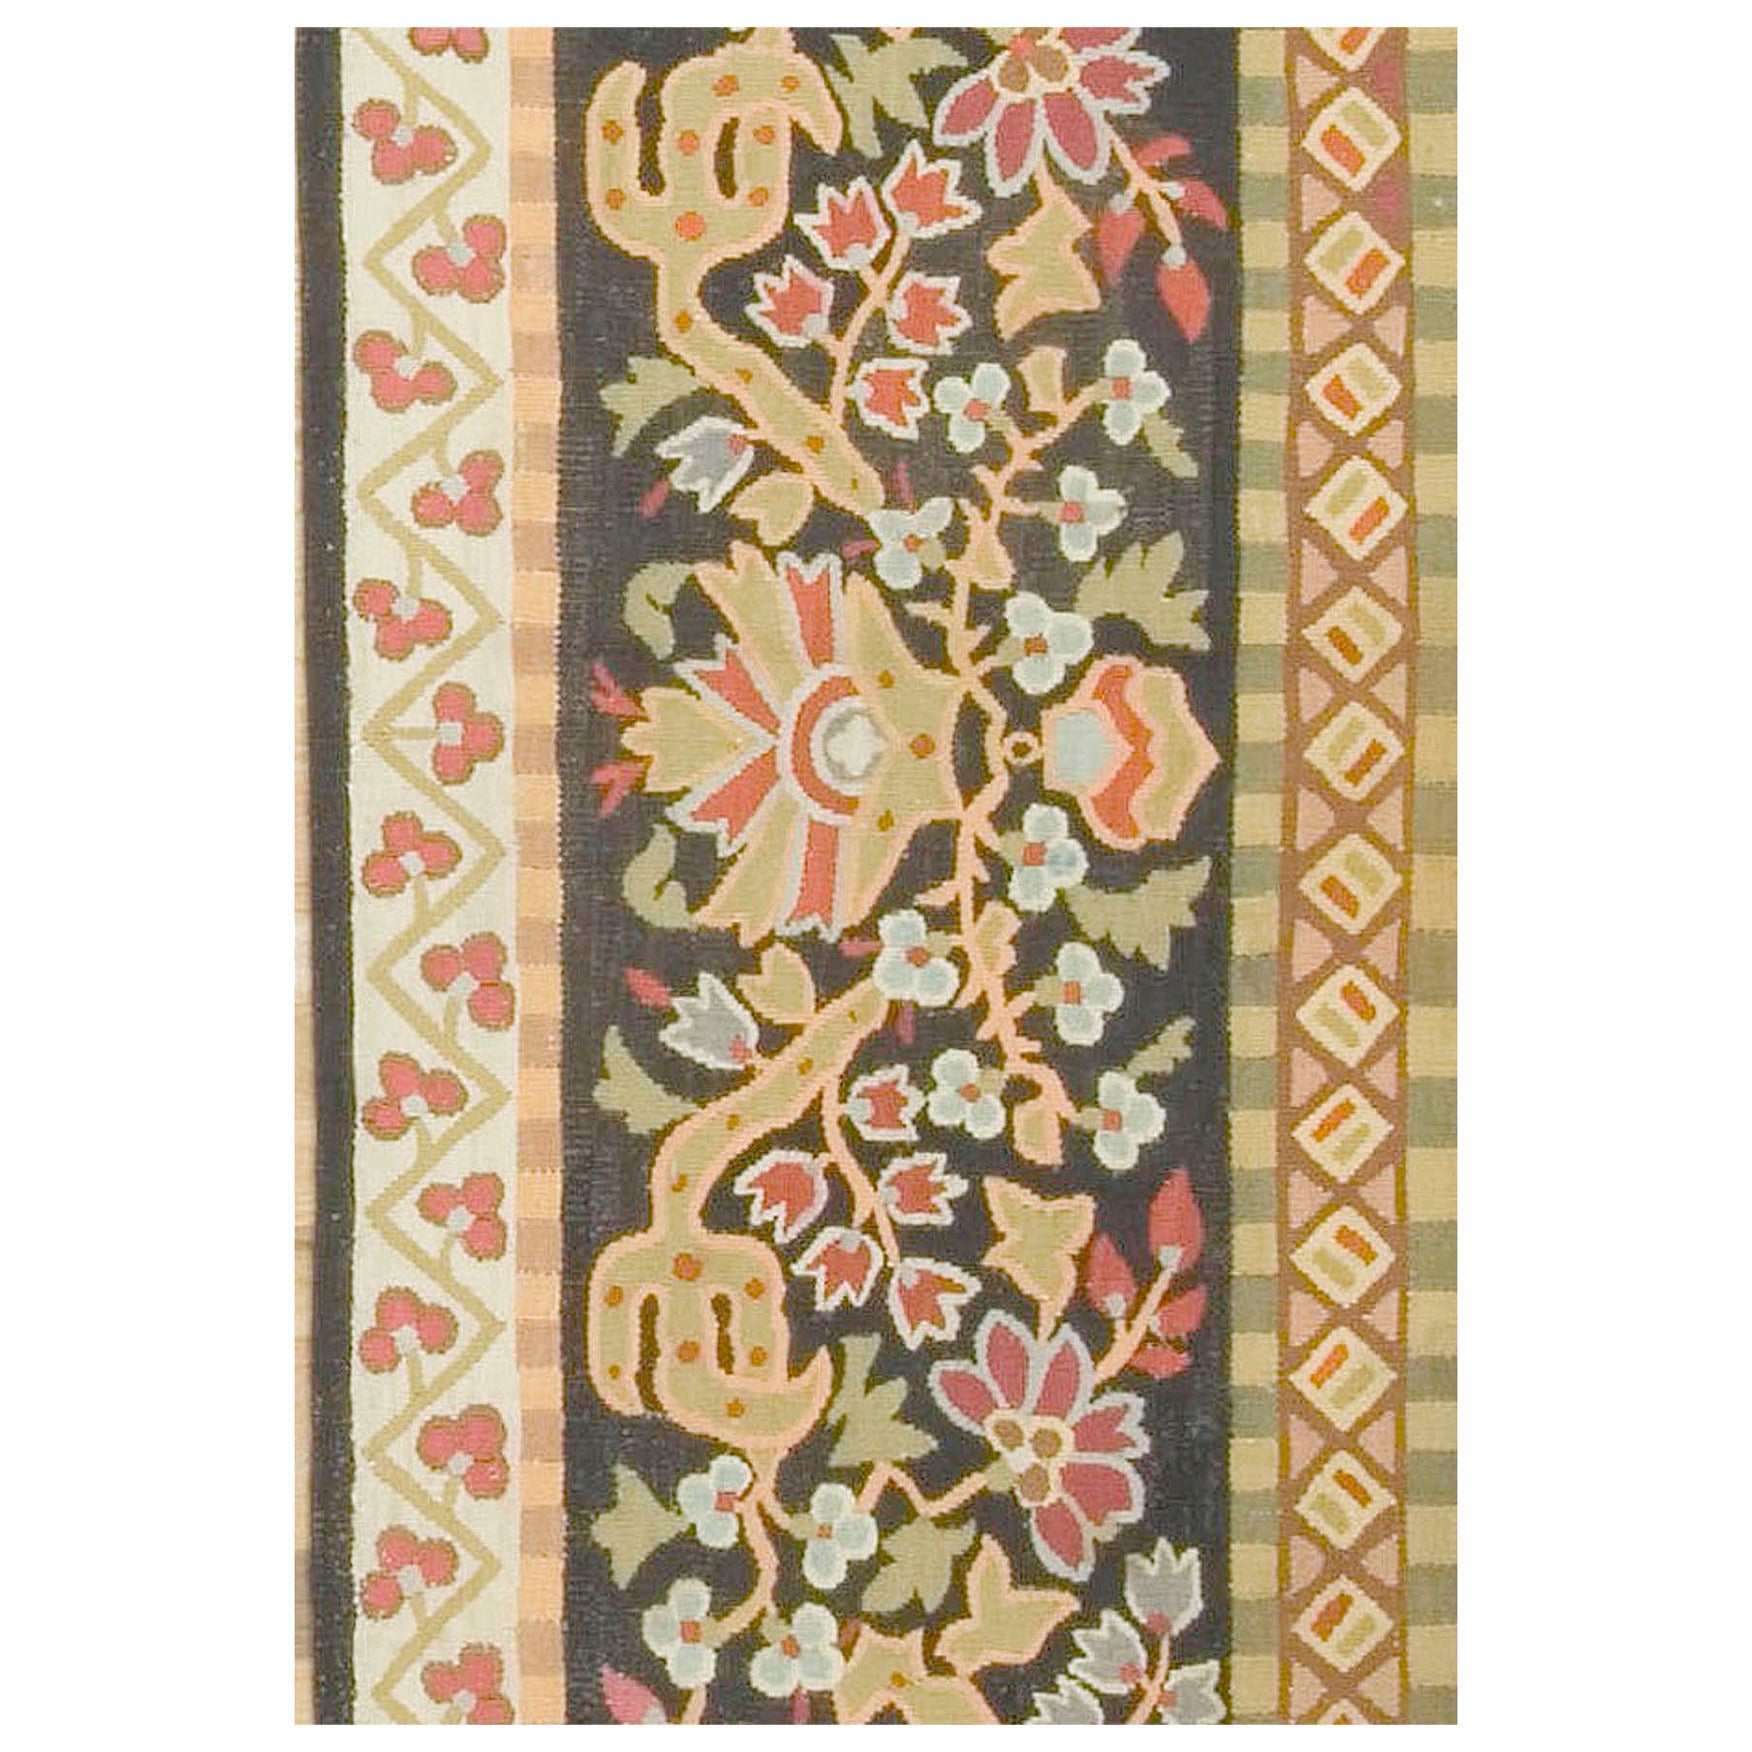 Antique French Aubusson panel, circa 1850, 2'3 x 11'2. This antique Aubusson panel may be used as a runner on the floor or as a wall decoration over a door or between windows or a table runner. The nearly black field displays a very complex pattern